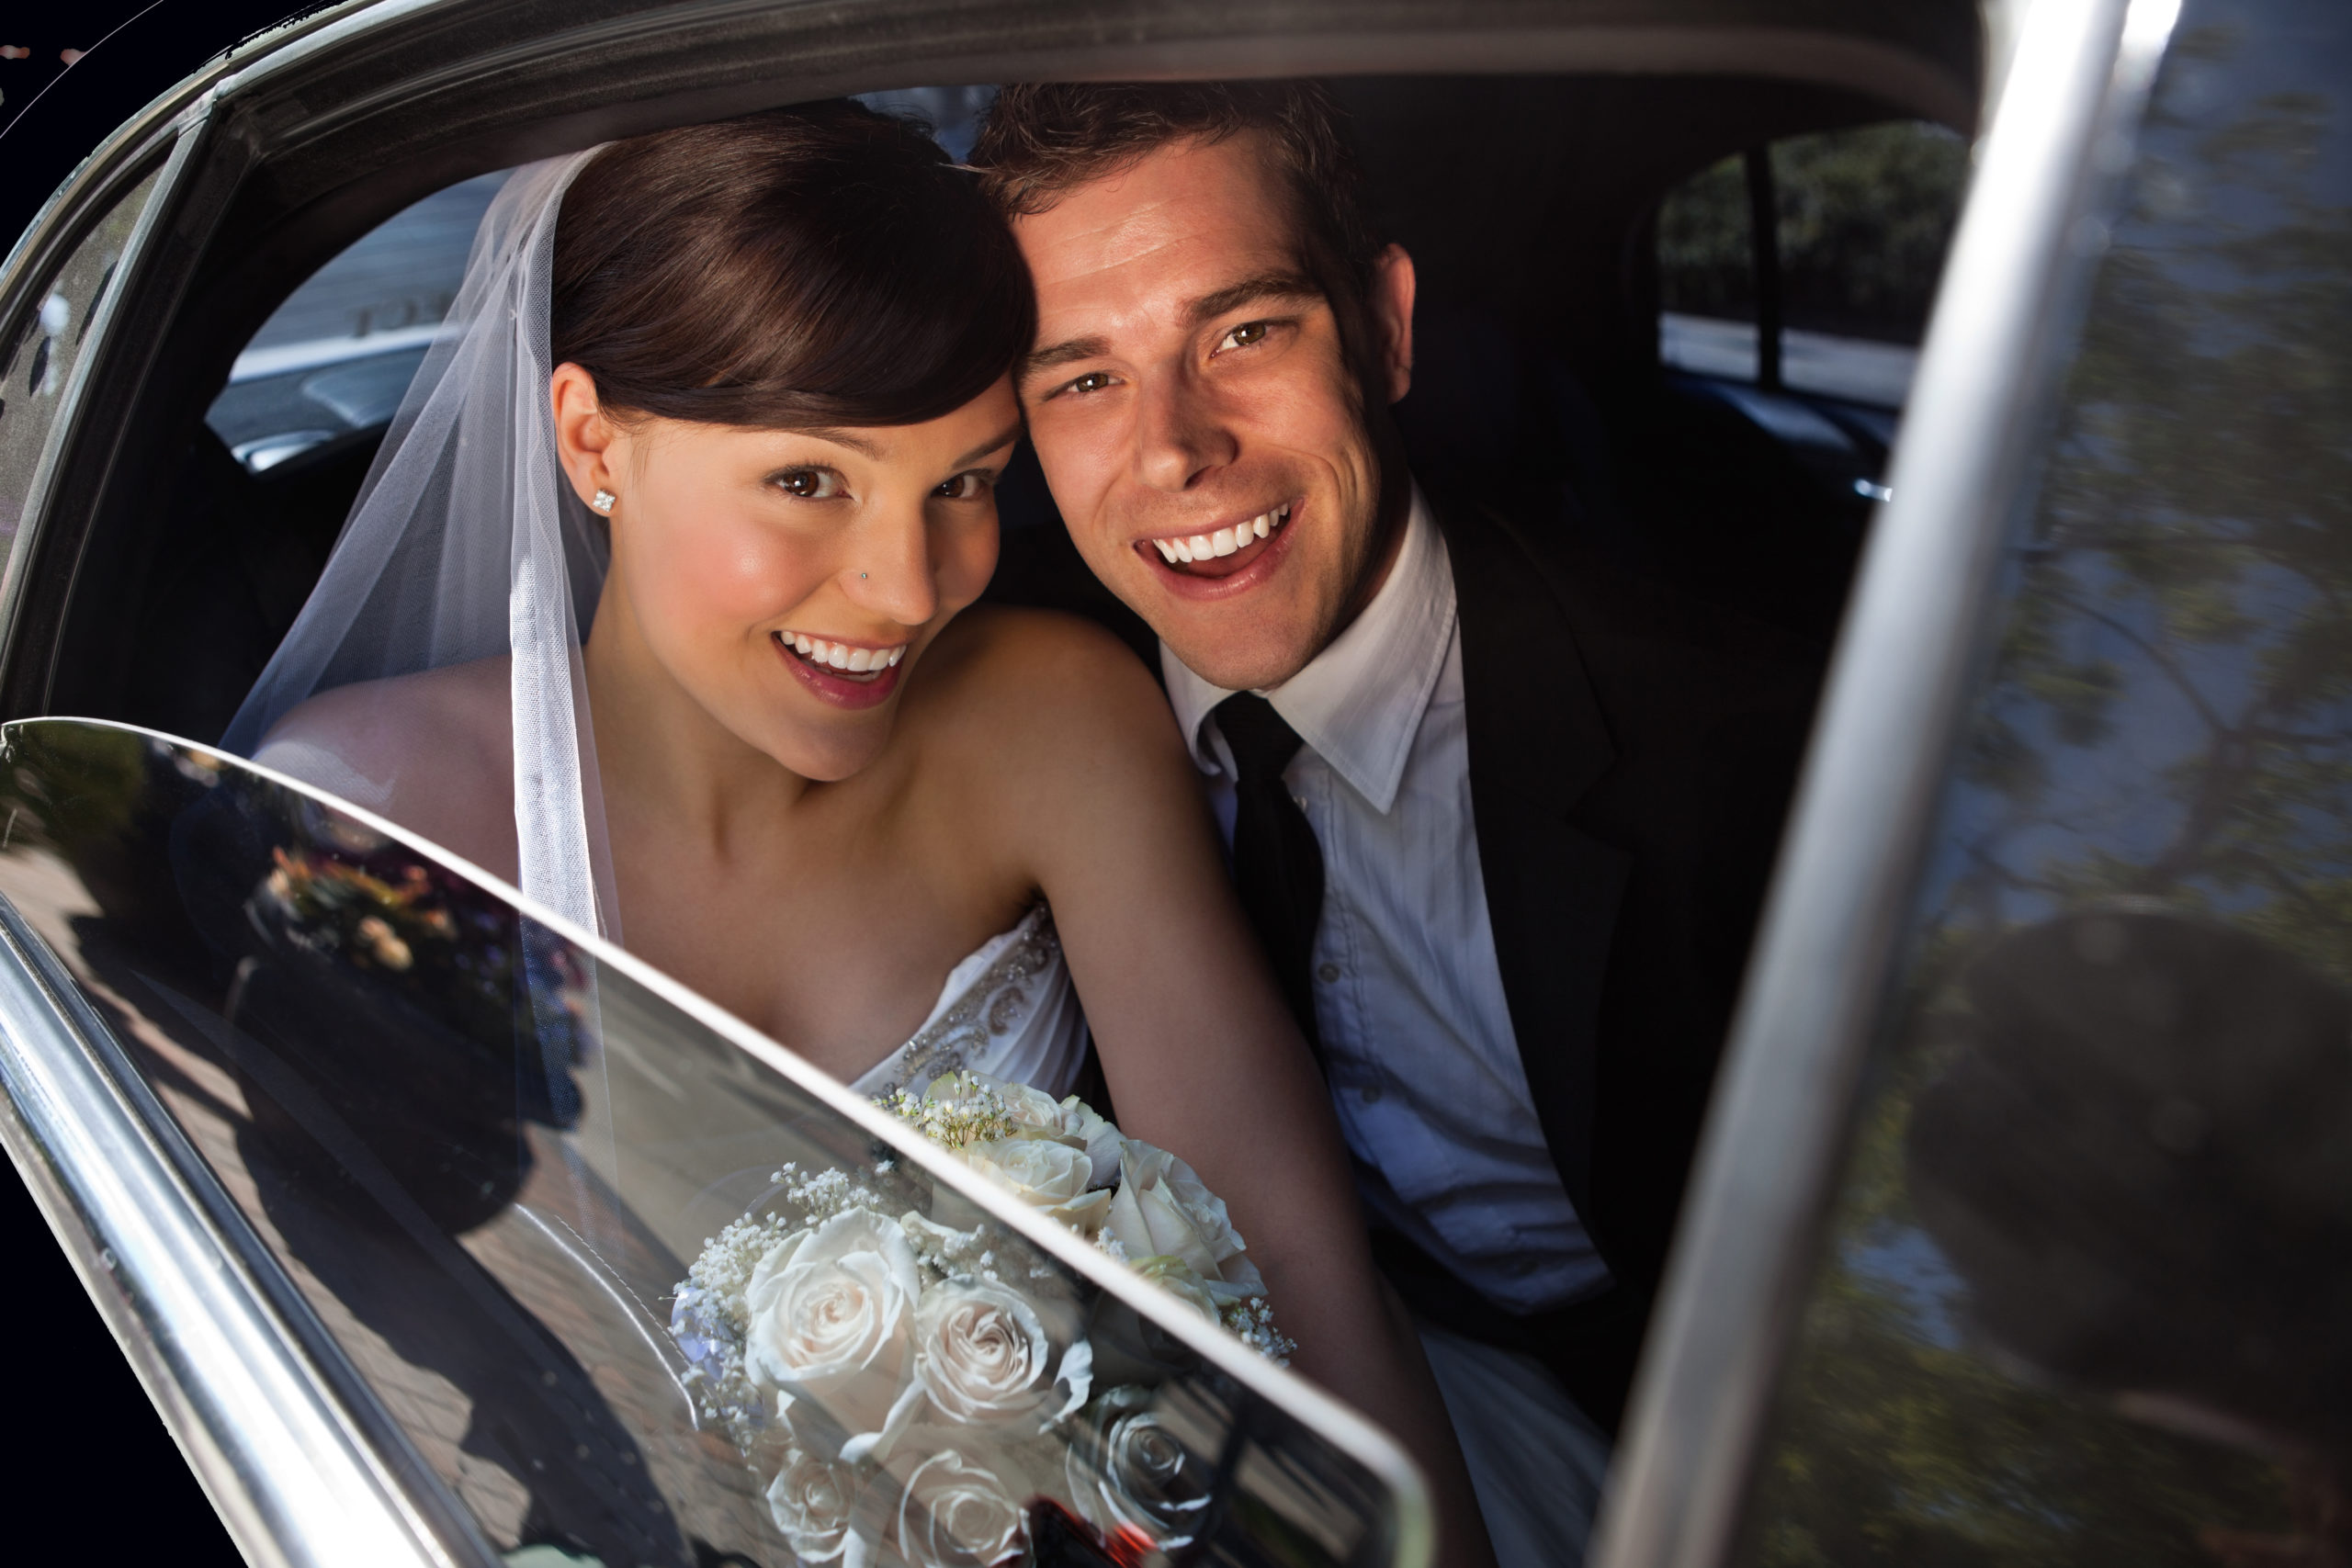 What Should I Expect From a Wedding Limo Service?